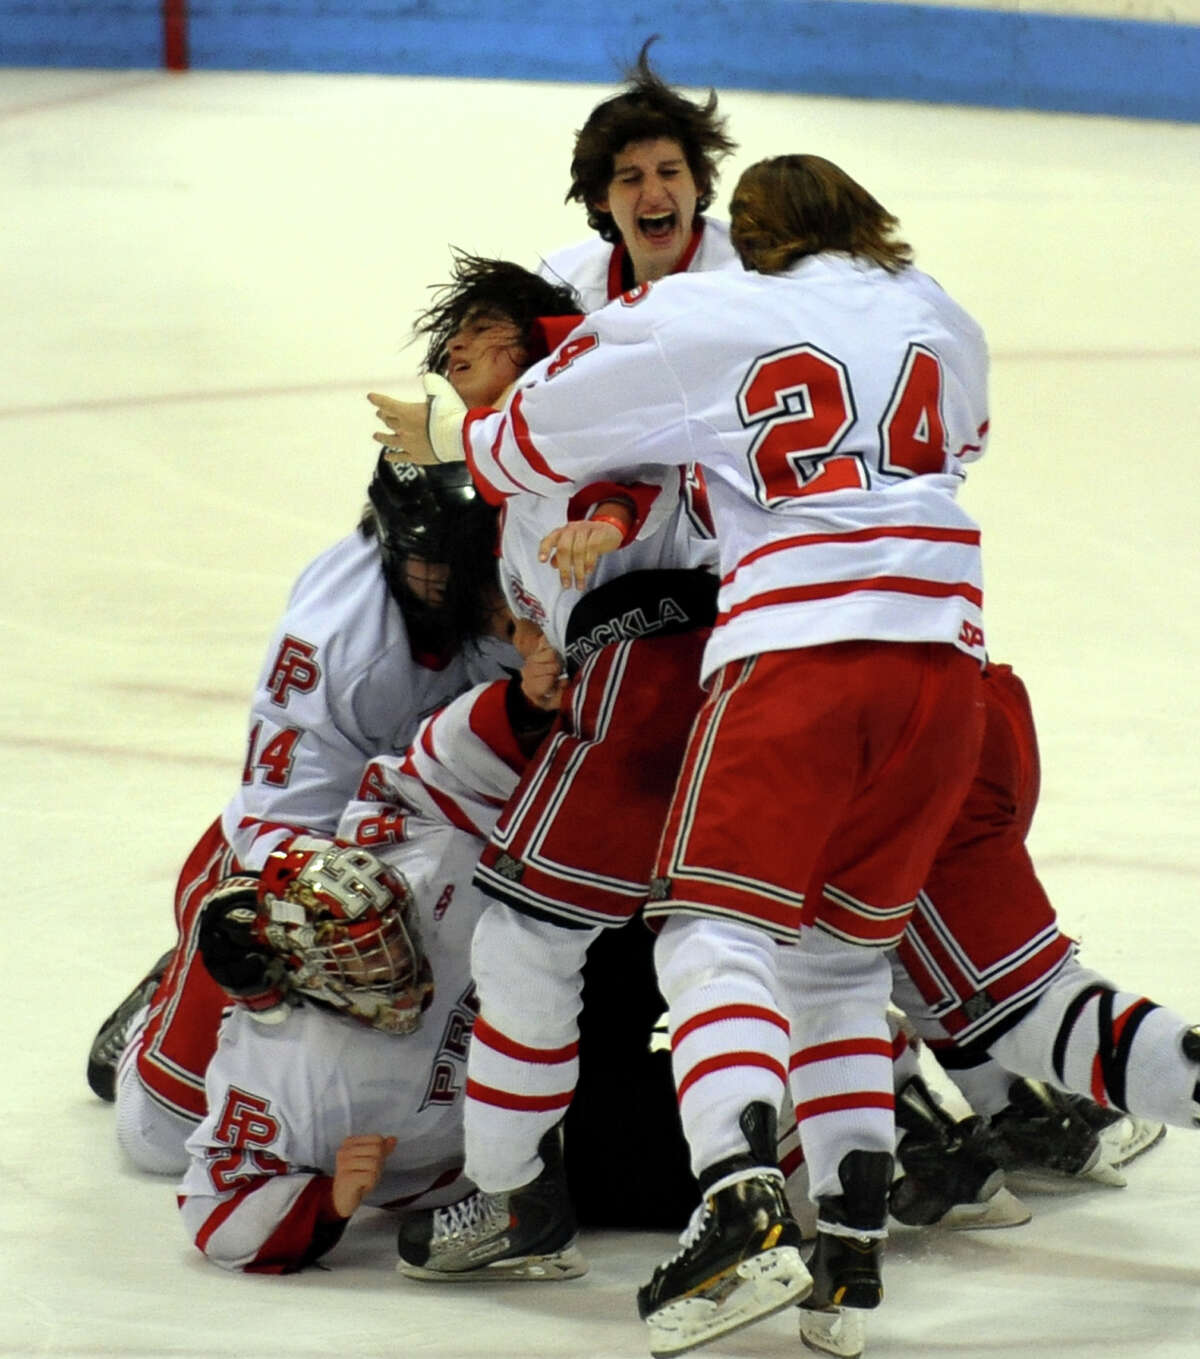 Fairfield Prep celebrates its win over Notre Dame of West Haven after CIAC Division I boys hockey final action at Ingalls Rink in New Haven, Conn. on March 19, 2013.